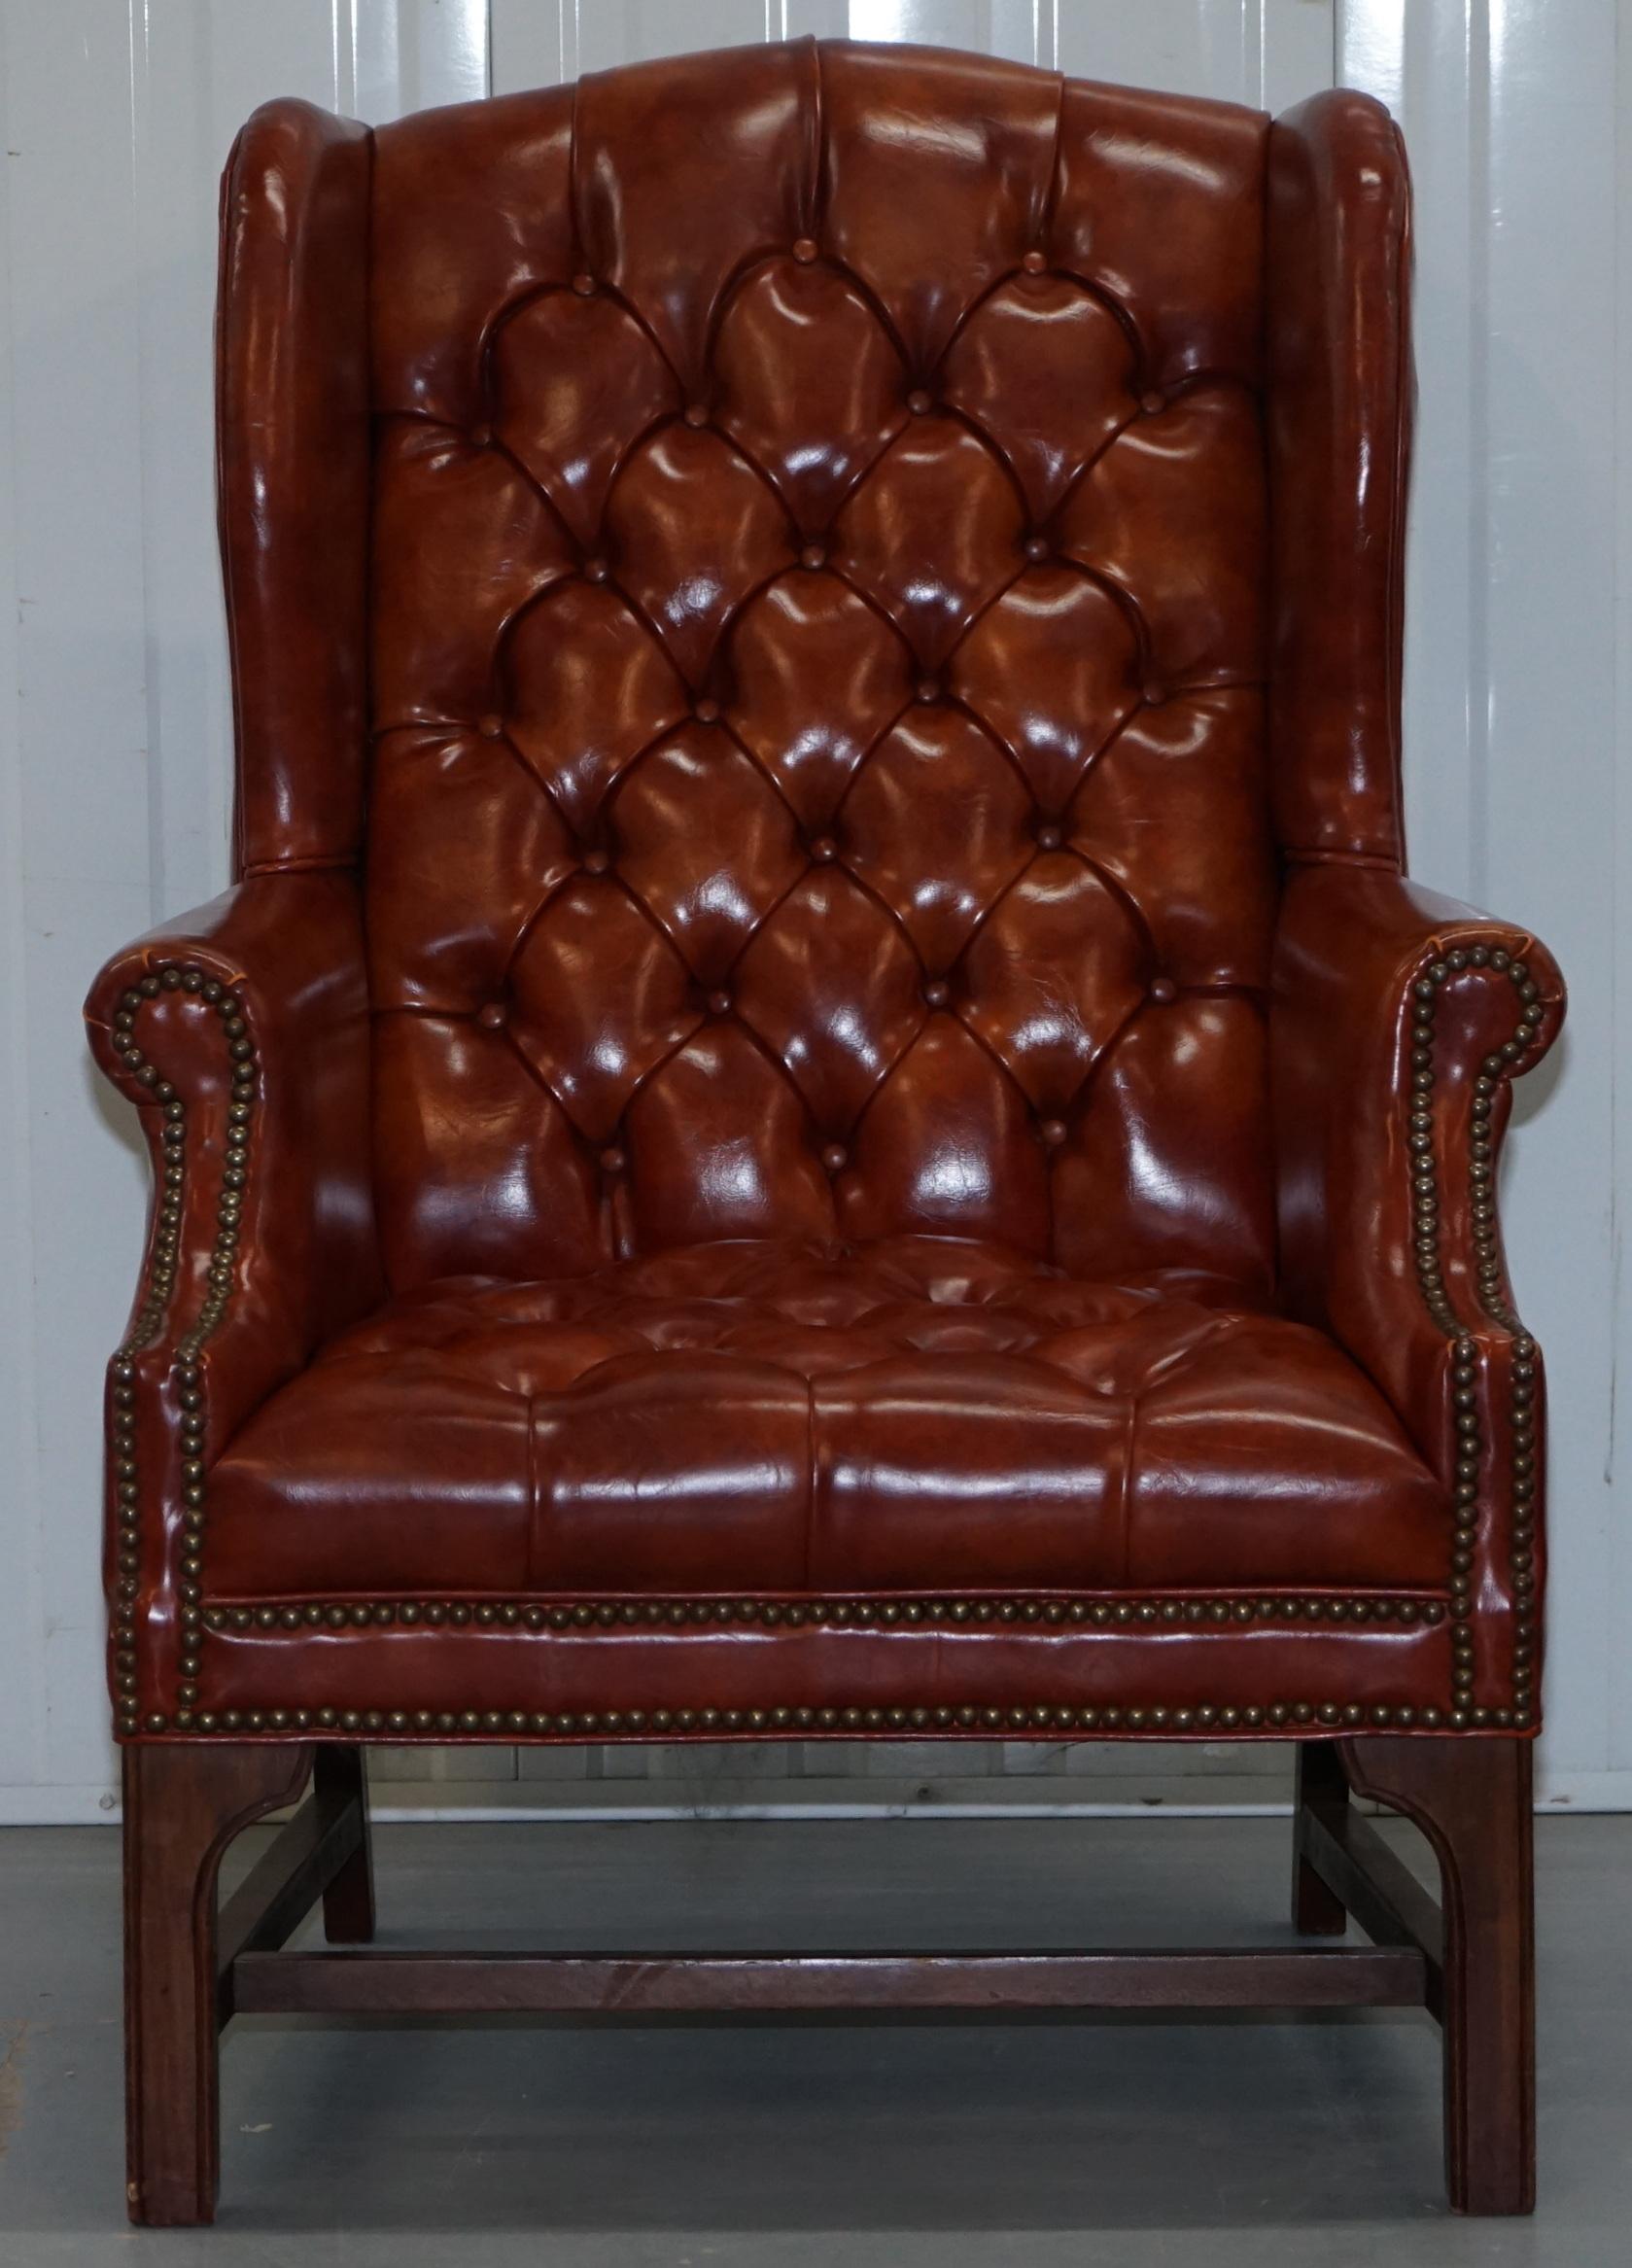 We are delighted to offer for sale very nice Chesterfield fully buttoned wingback armchair

A good looking well made and comfortable chair, the frame is what's called a Georgian H frame, its because if you lay the chair on its back and look at the